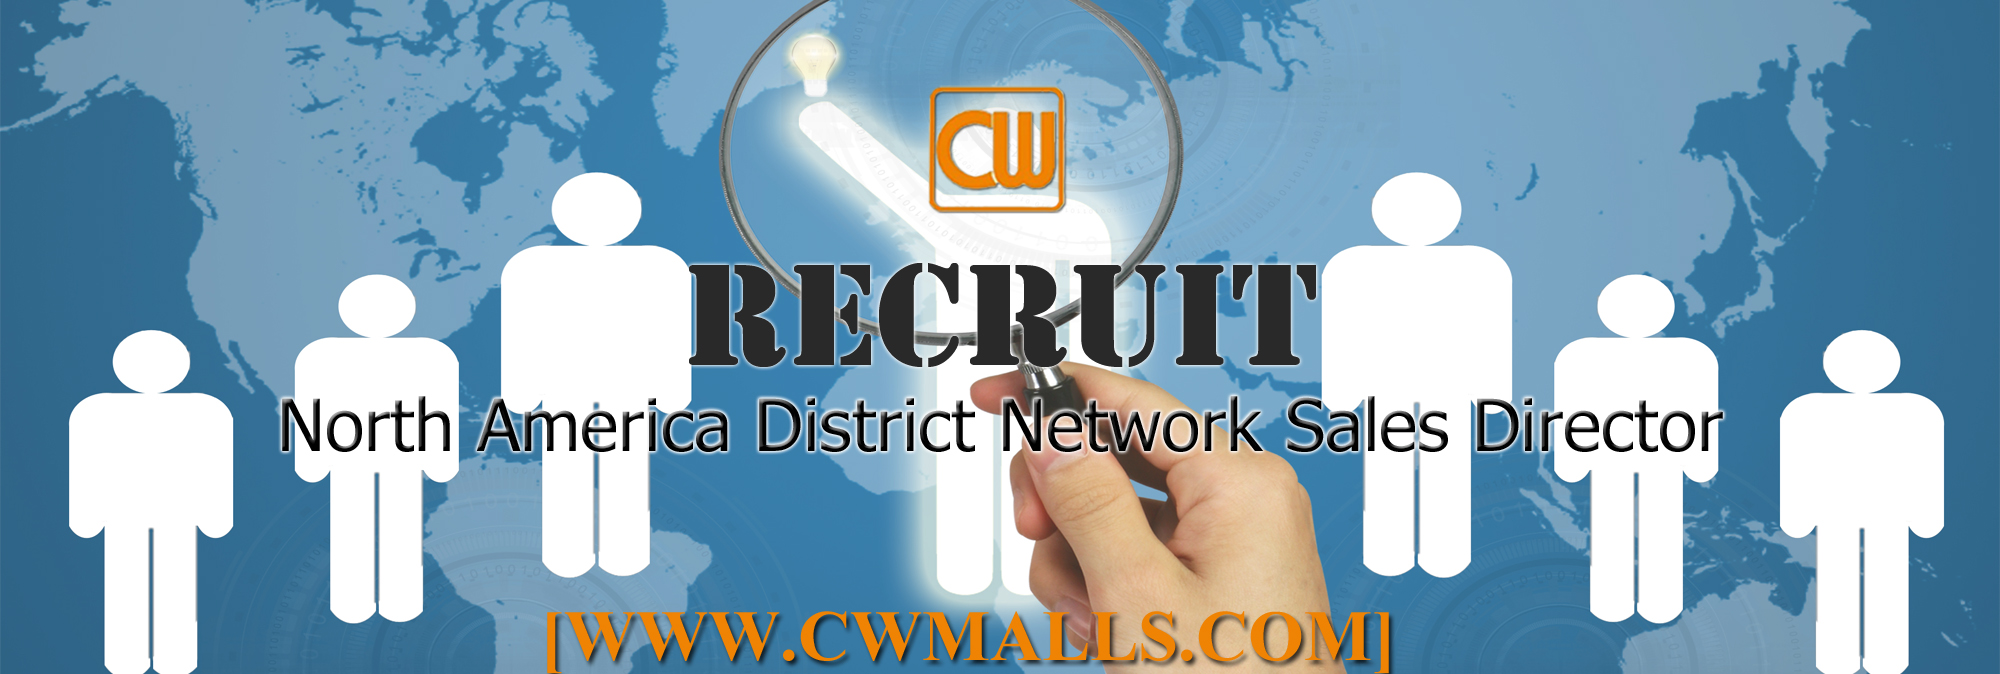 Sincerely Recruit North America District Network Sales Director